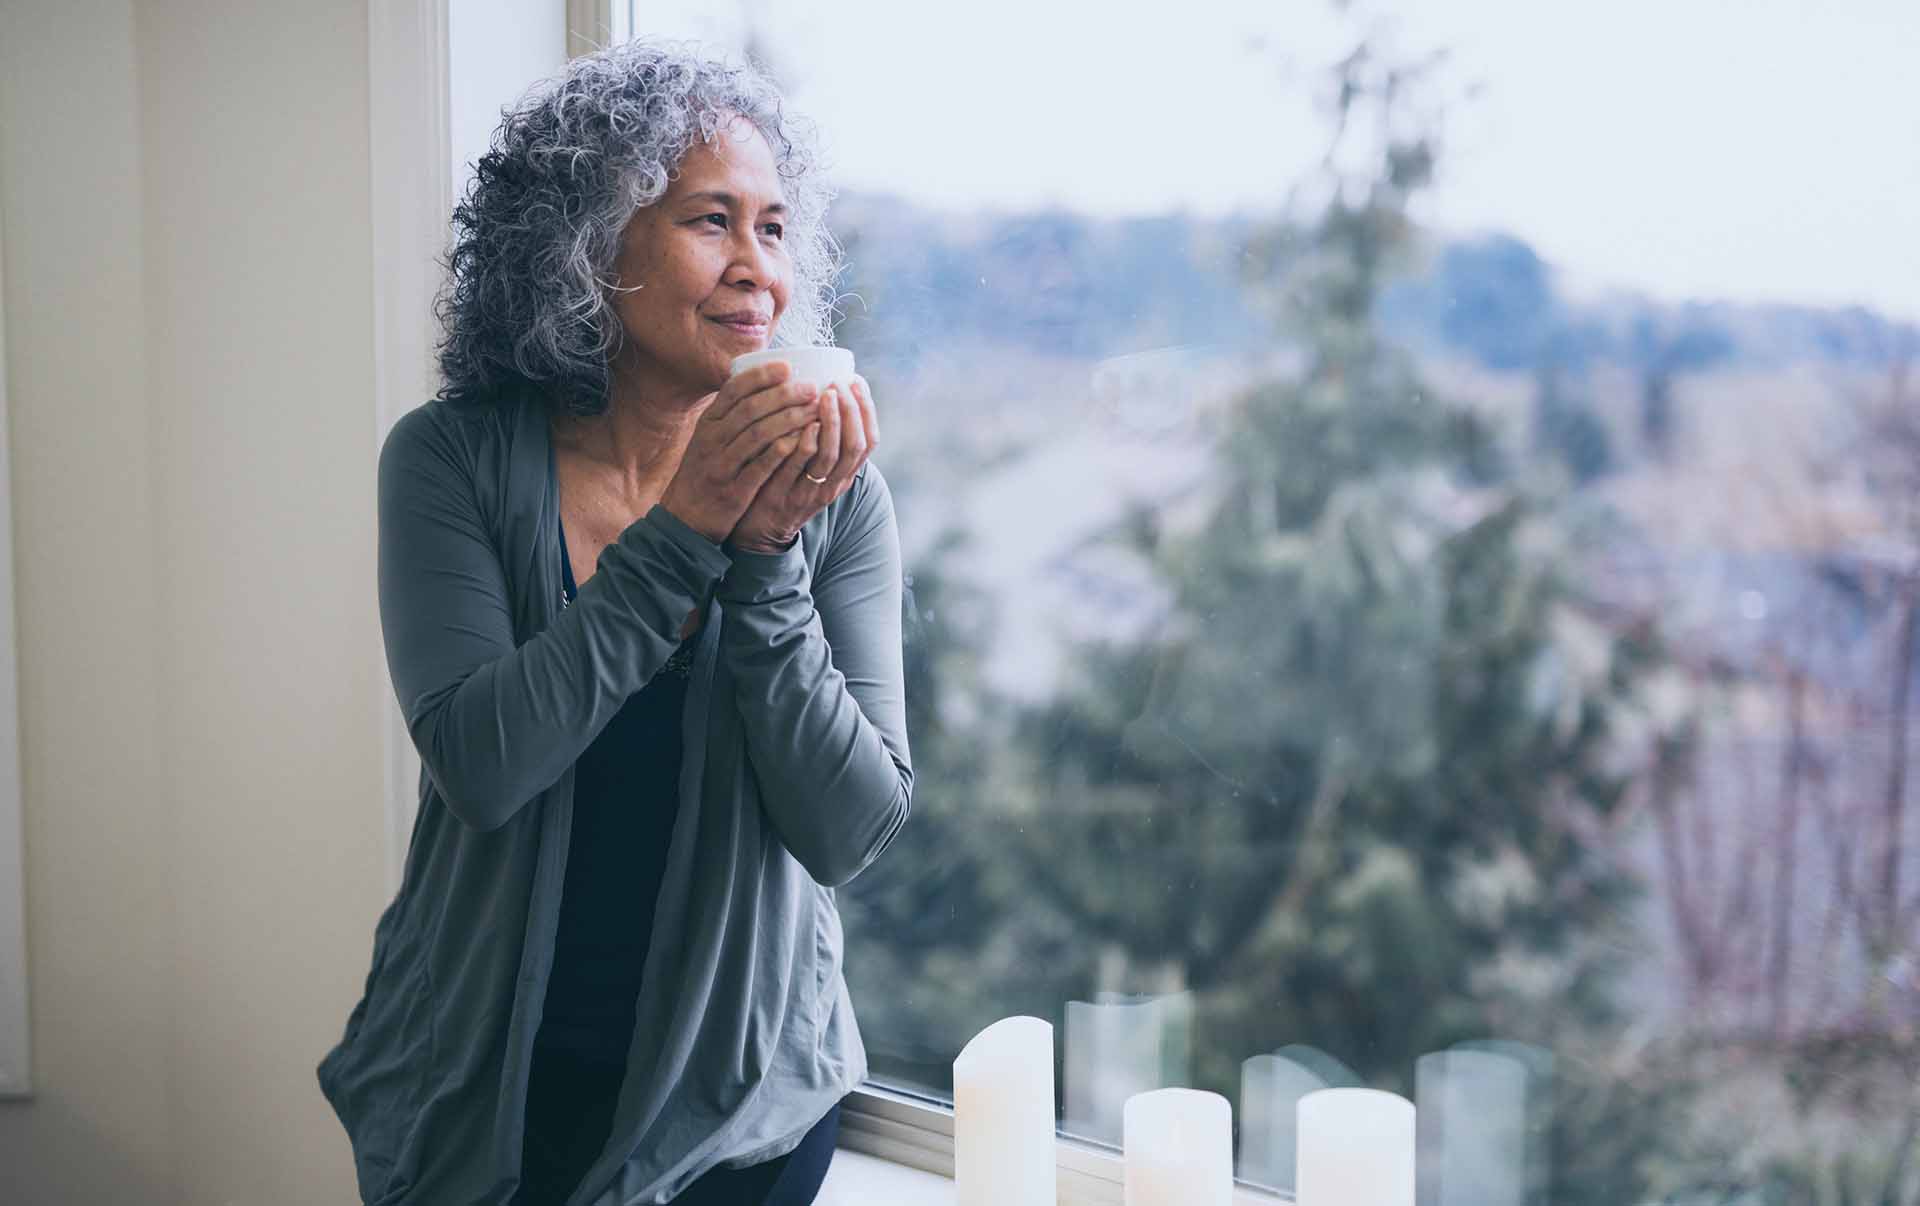 A beautiful ethnic older woman sits in her window sill and looks out contemplatively while she holds a cup of tea.